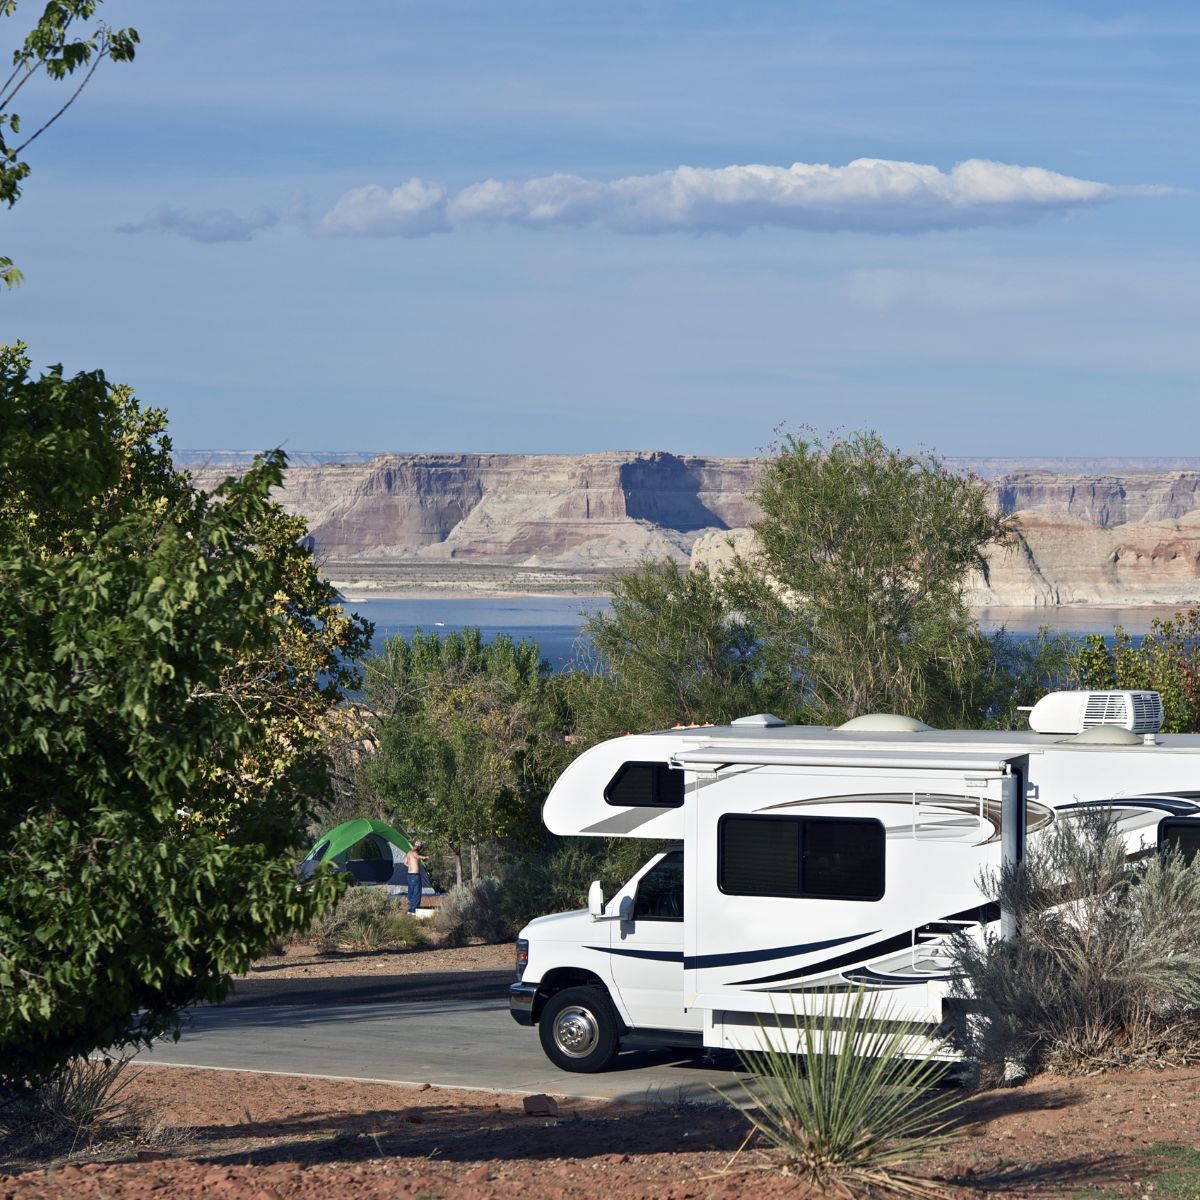 Rv parked by the lake and a green tent in the distance.